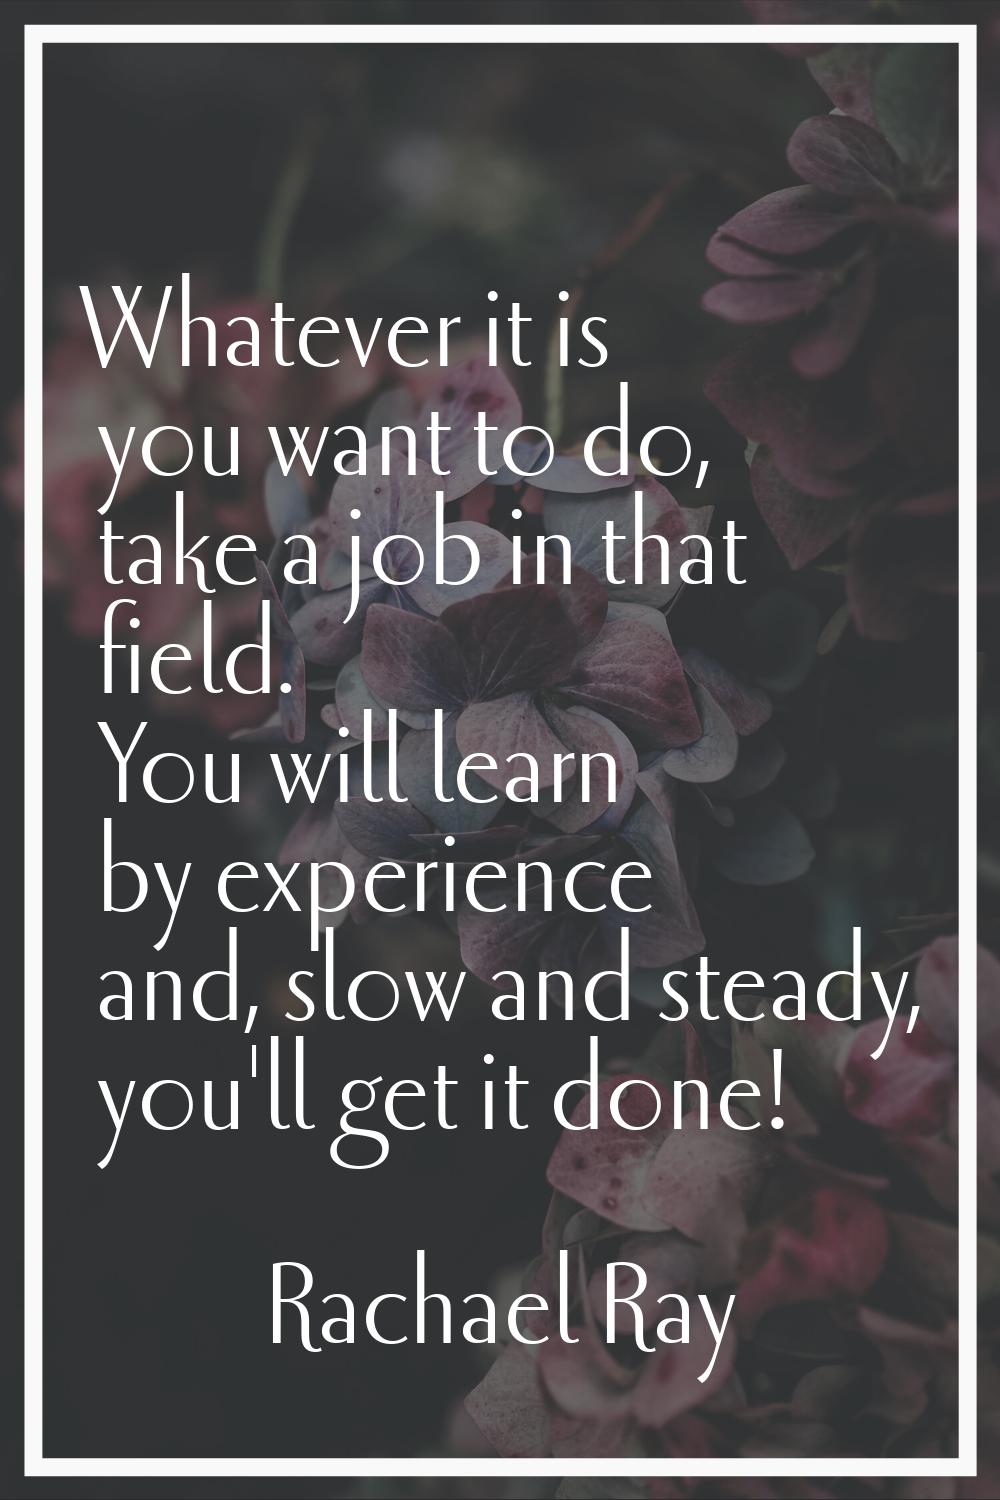 Whatever it is you want to do, take a job in that field. You will learn by experience and, slow and